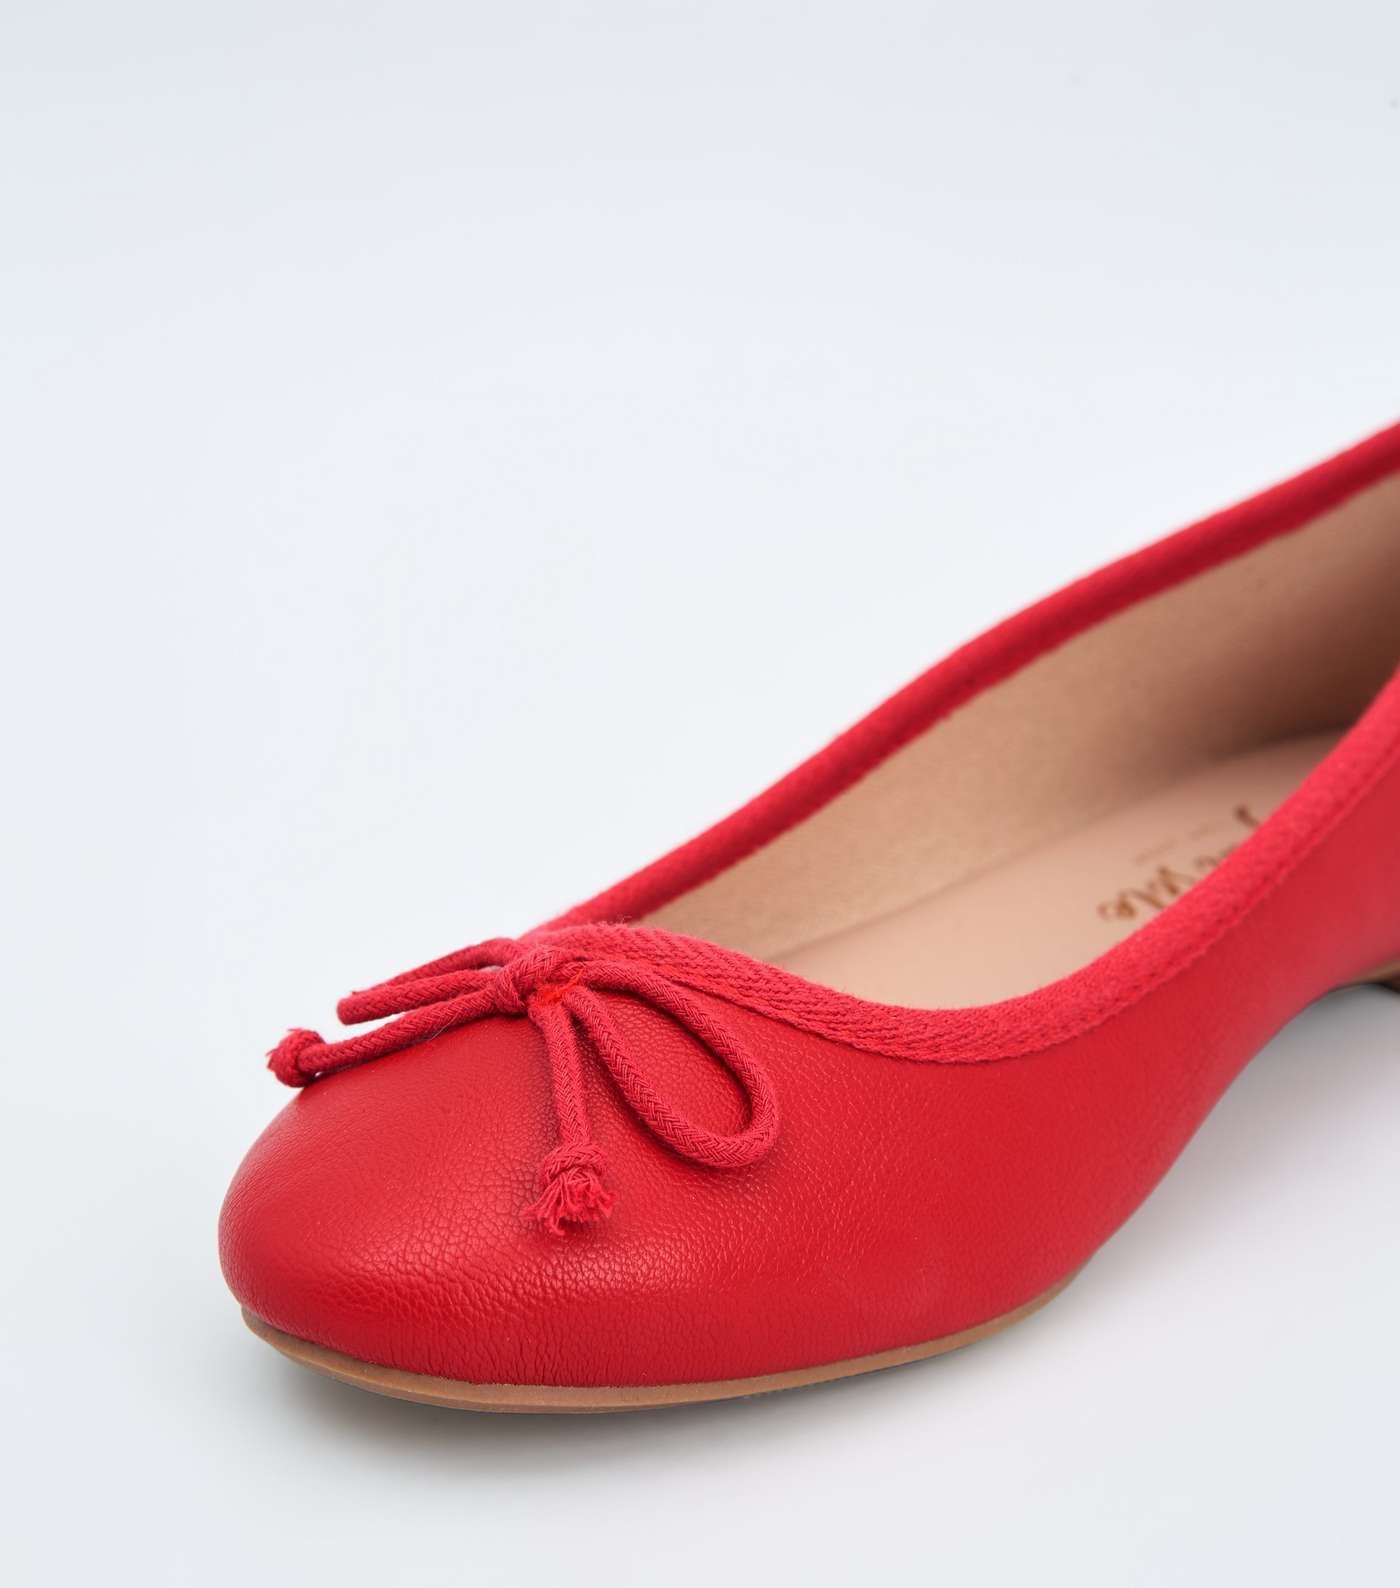 Red Leather-Look Ballet Pumps Image 4